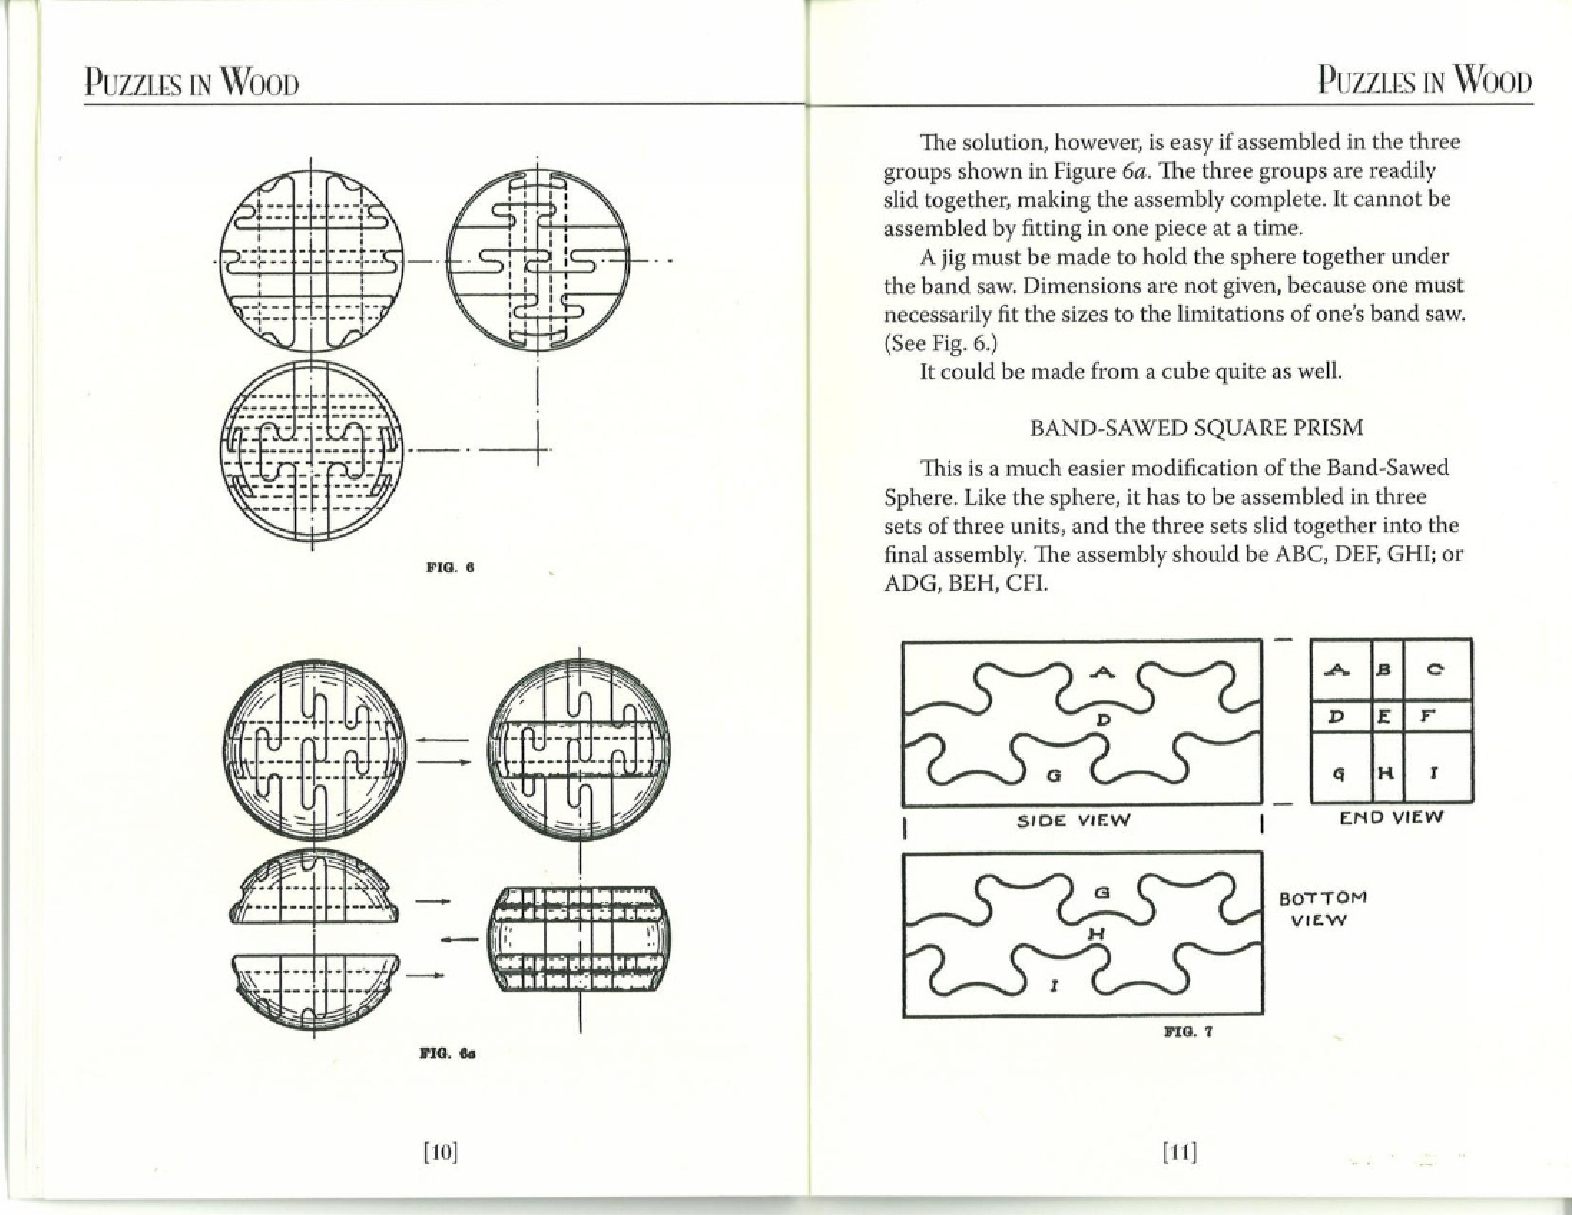 13-5 (10-11) Puzzles in Wood Simple Patterns for Creating 45 Classics _木材-简单的模式，创建45个经典